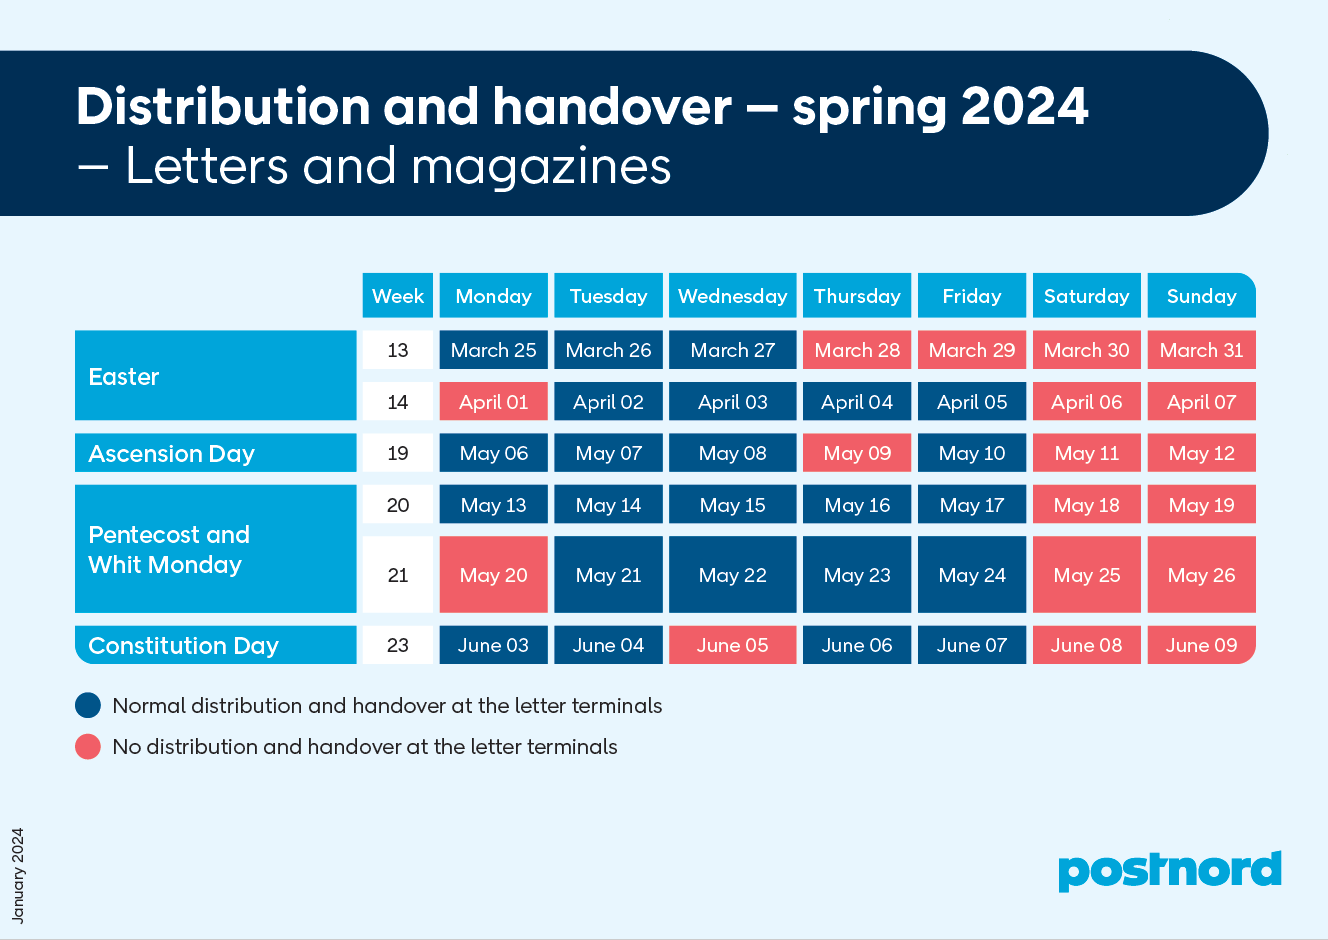 Distribution and handovers - Letters and magazines_1.png